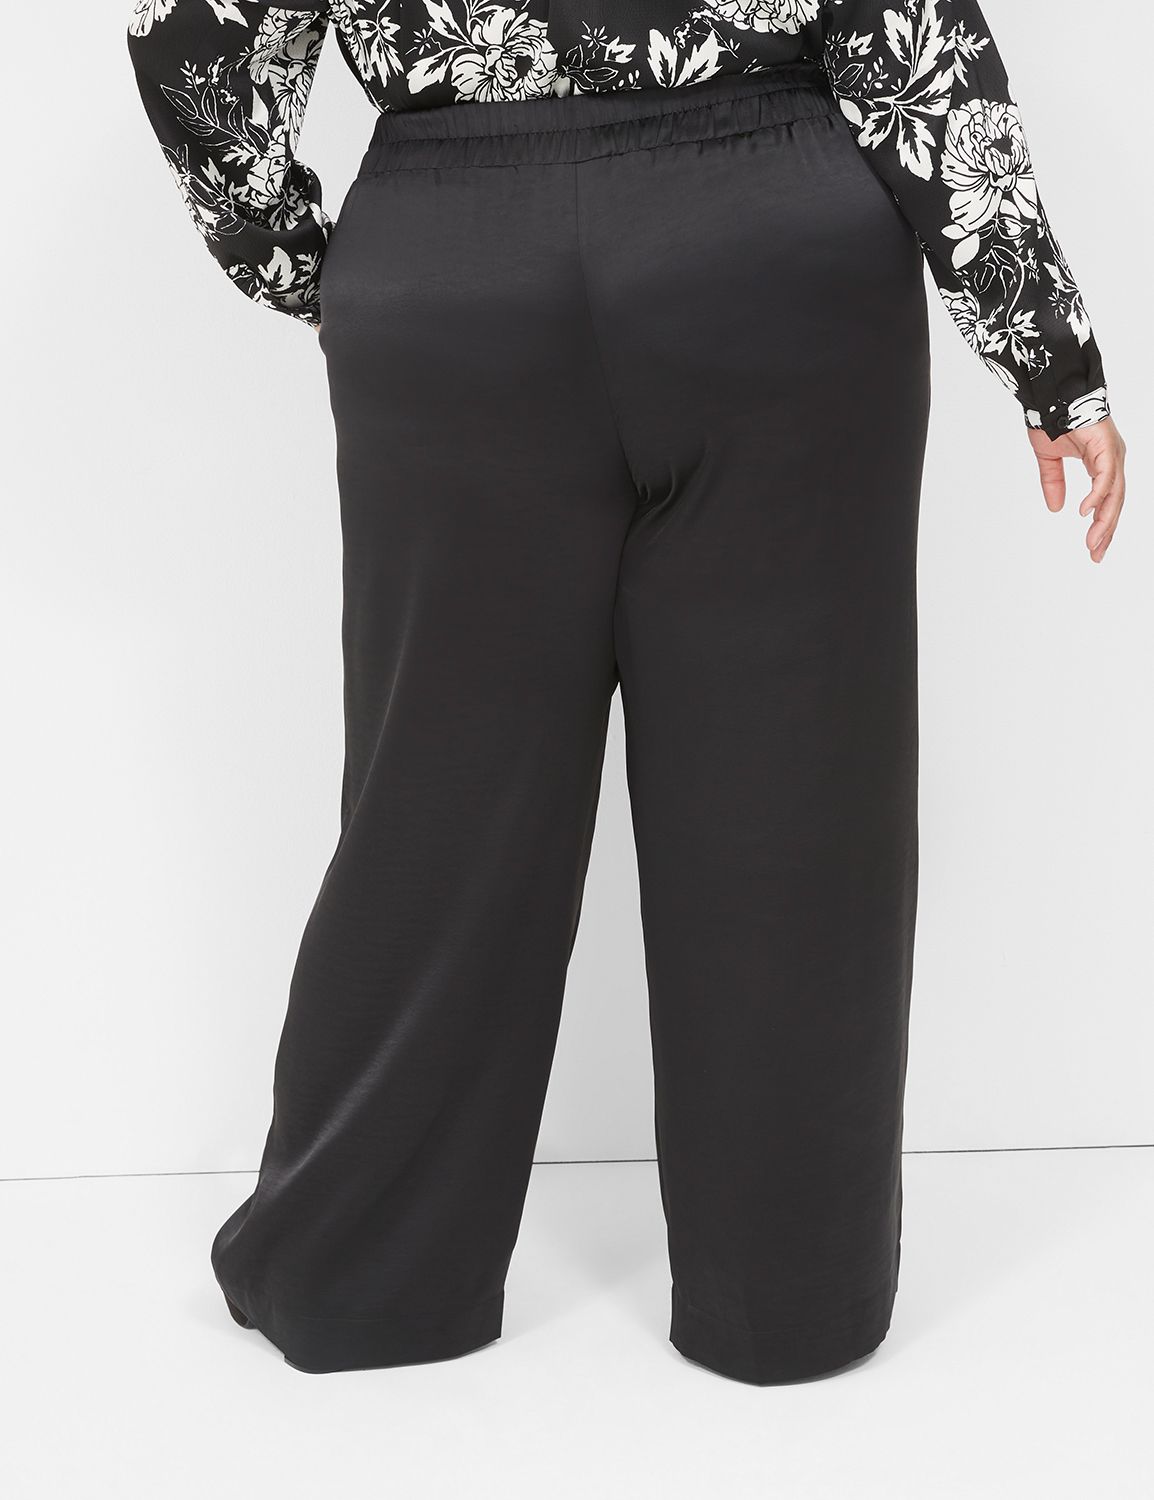 Lane Bryant Pull On Leather Pants for Women